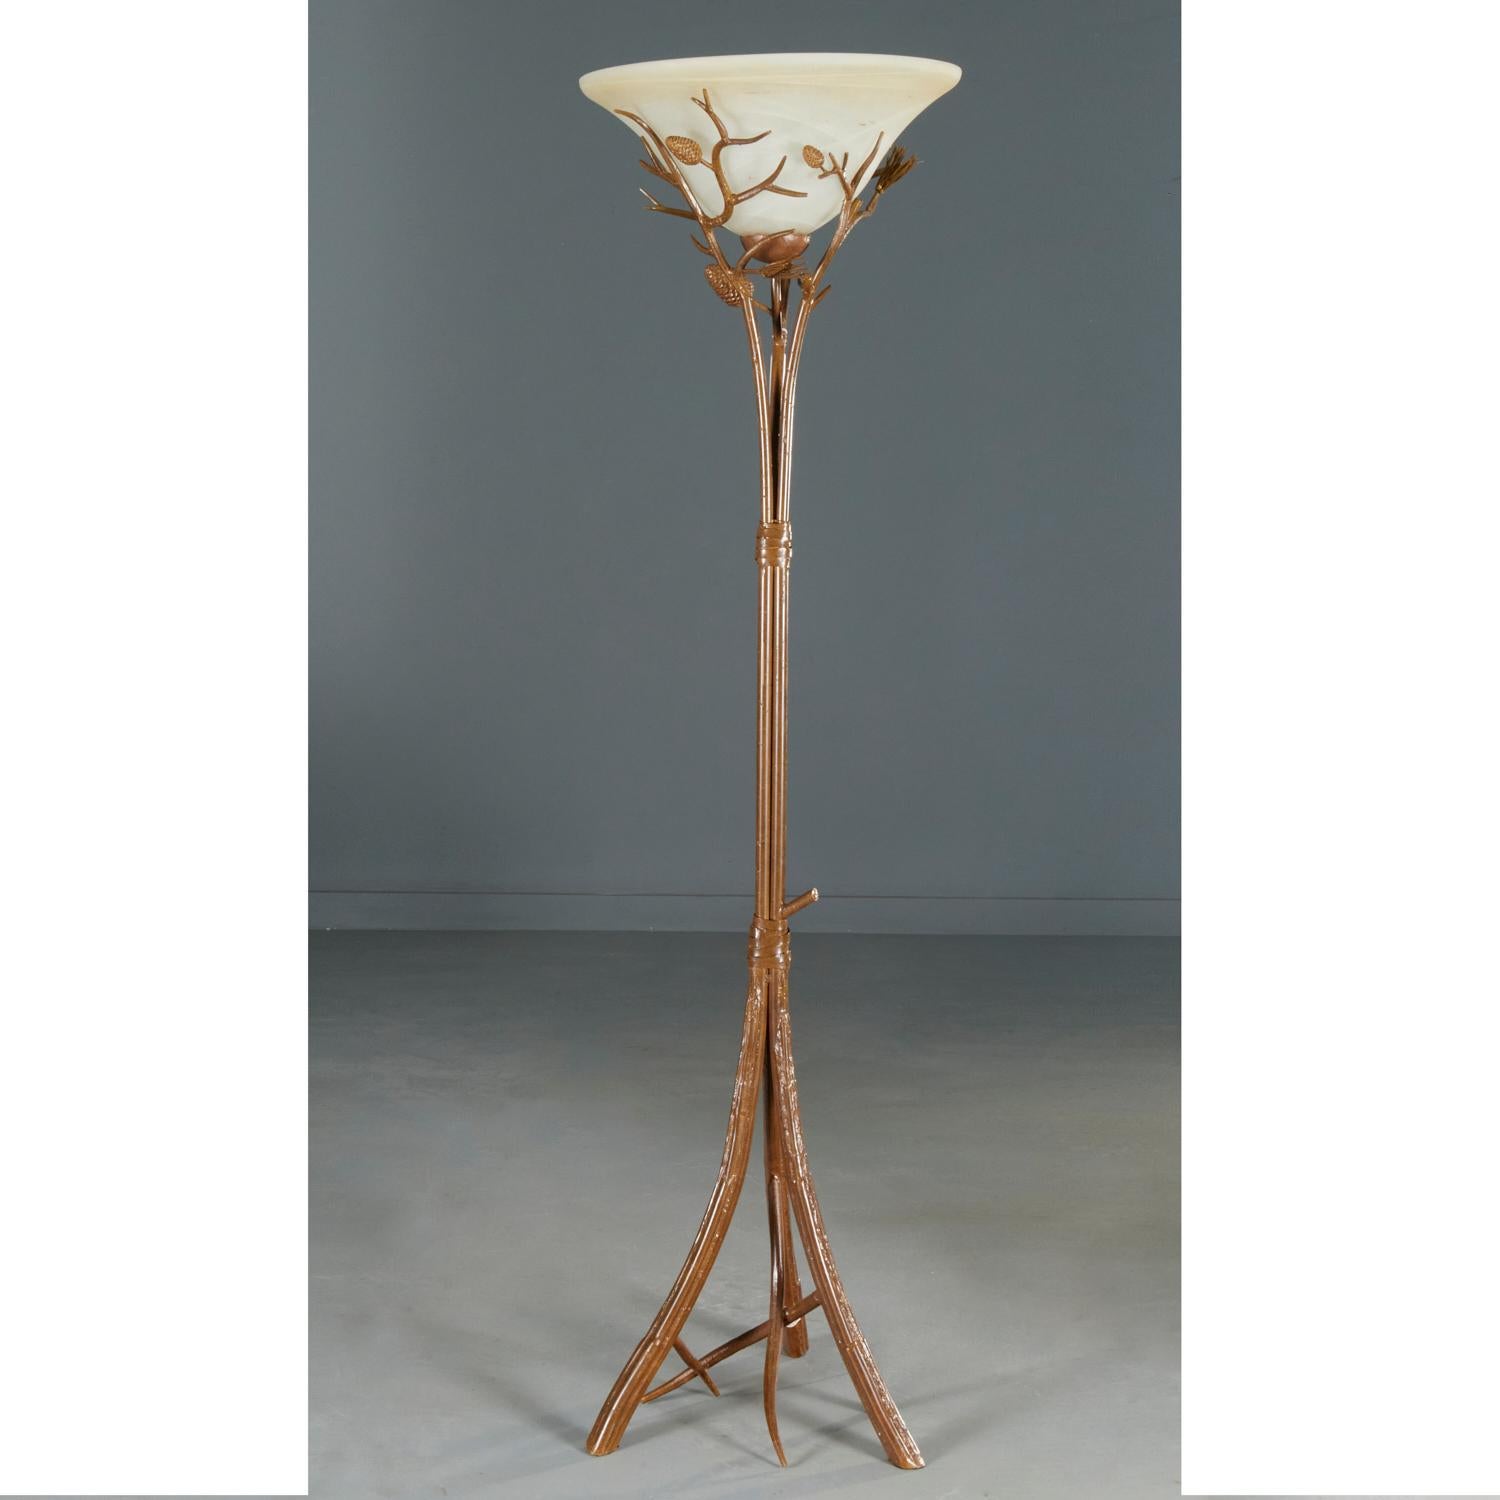 20th Century Contemporary Faux Bois Torchiere Floor Lamp with Fir Pine Cones and Needles For Sale